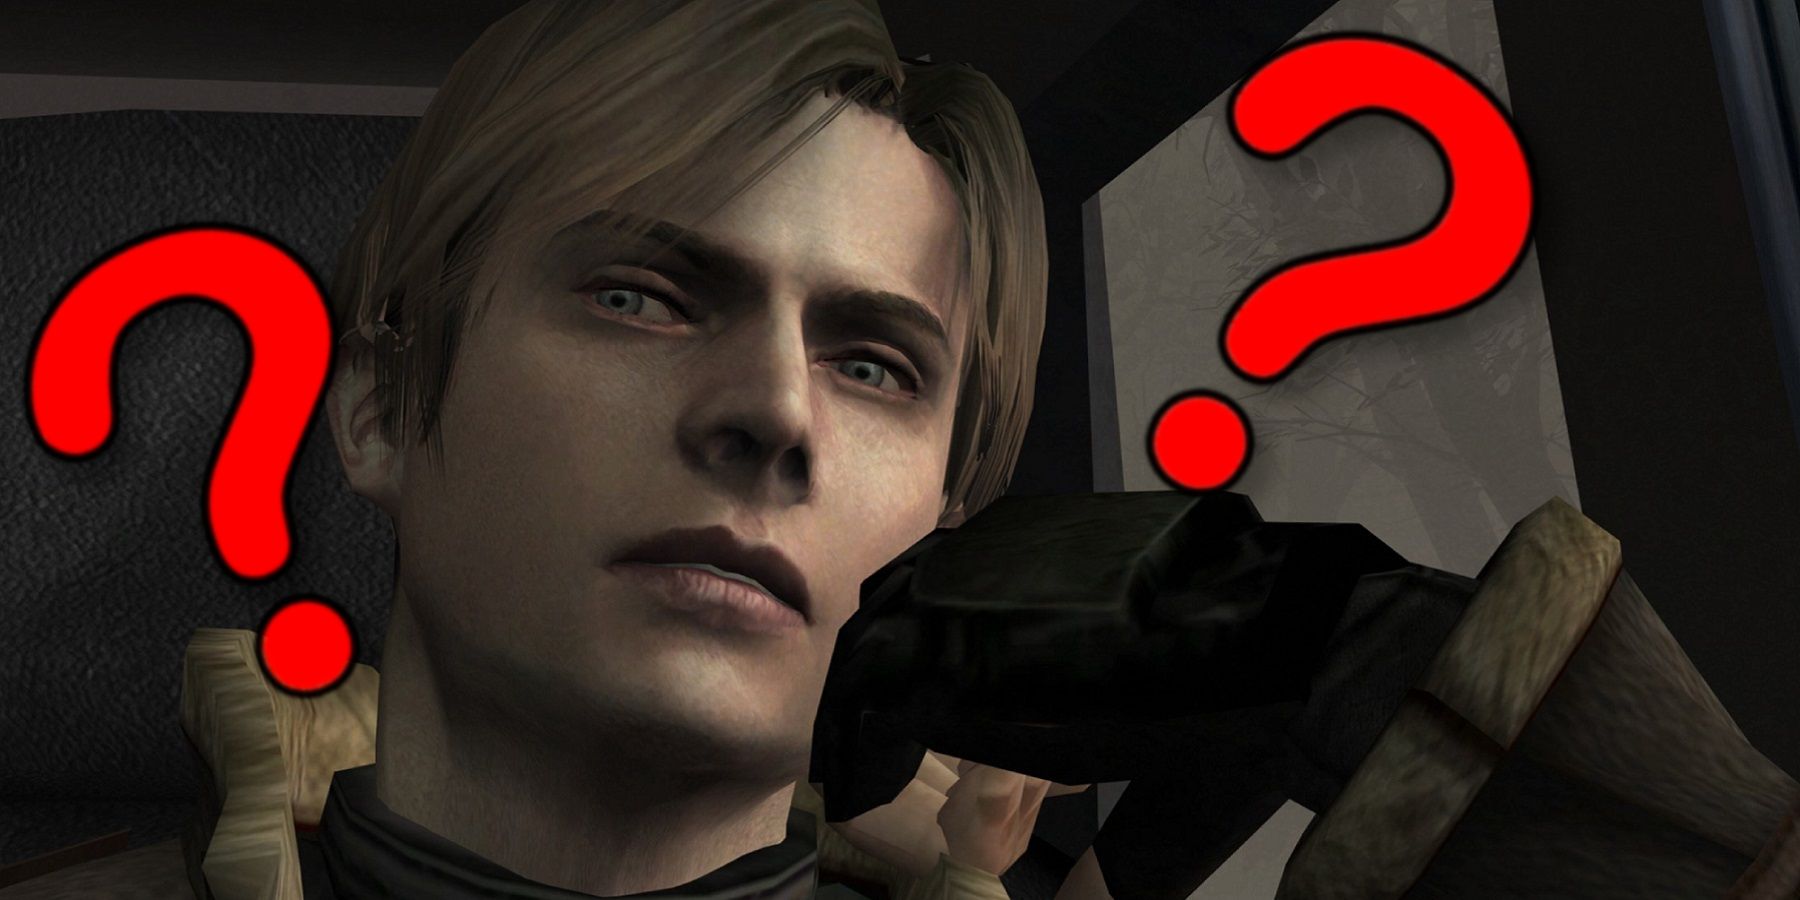 A close up on Leon Kennedy from Resident Evil 4 with some red question marks around him.